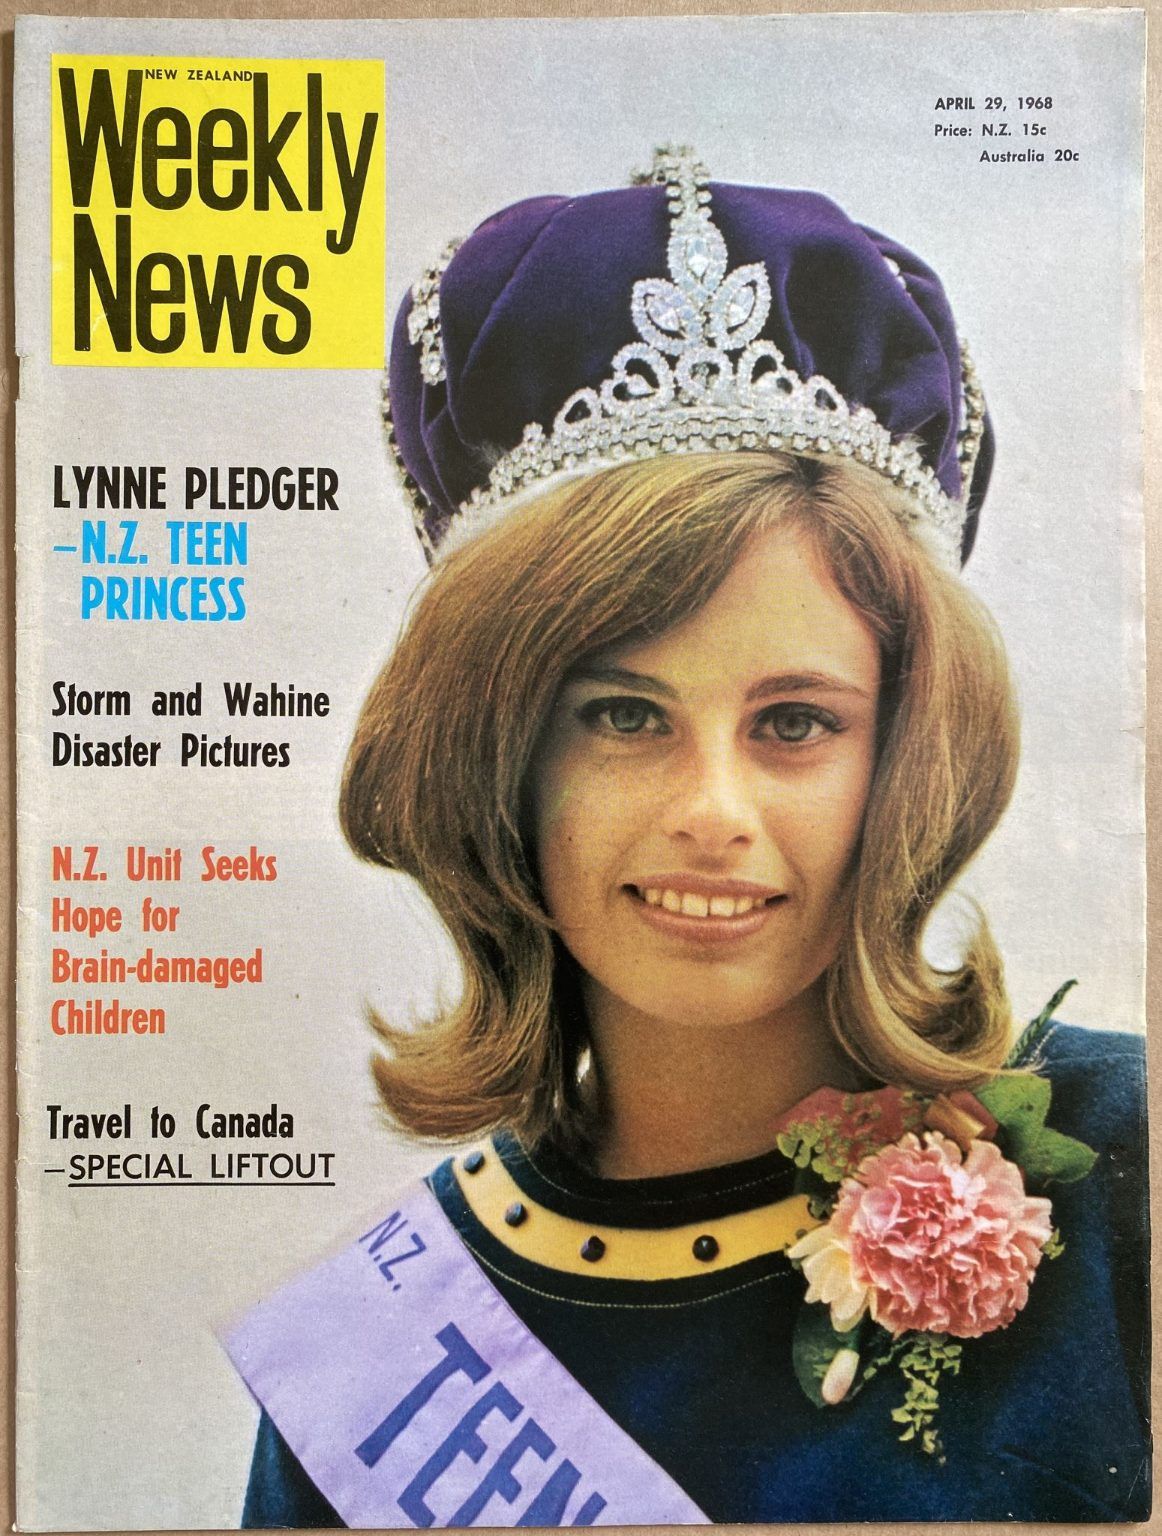 OLD NEWSPAPER: New Zealand Weekly News, No. 5448, 29 April 1968